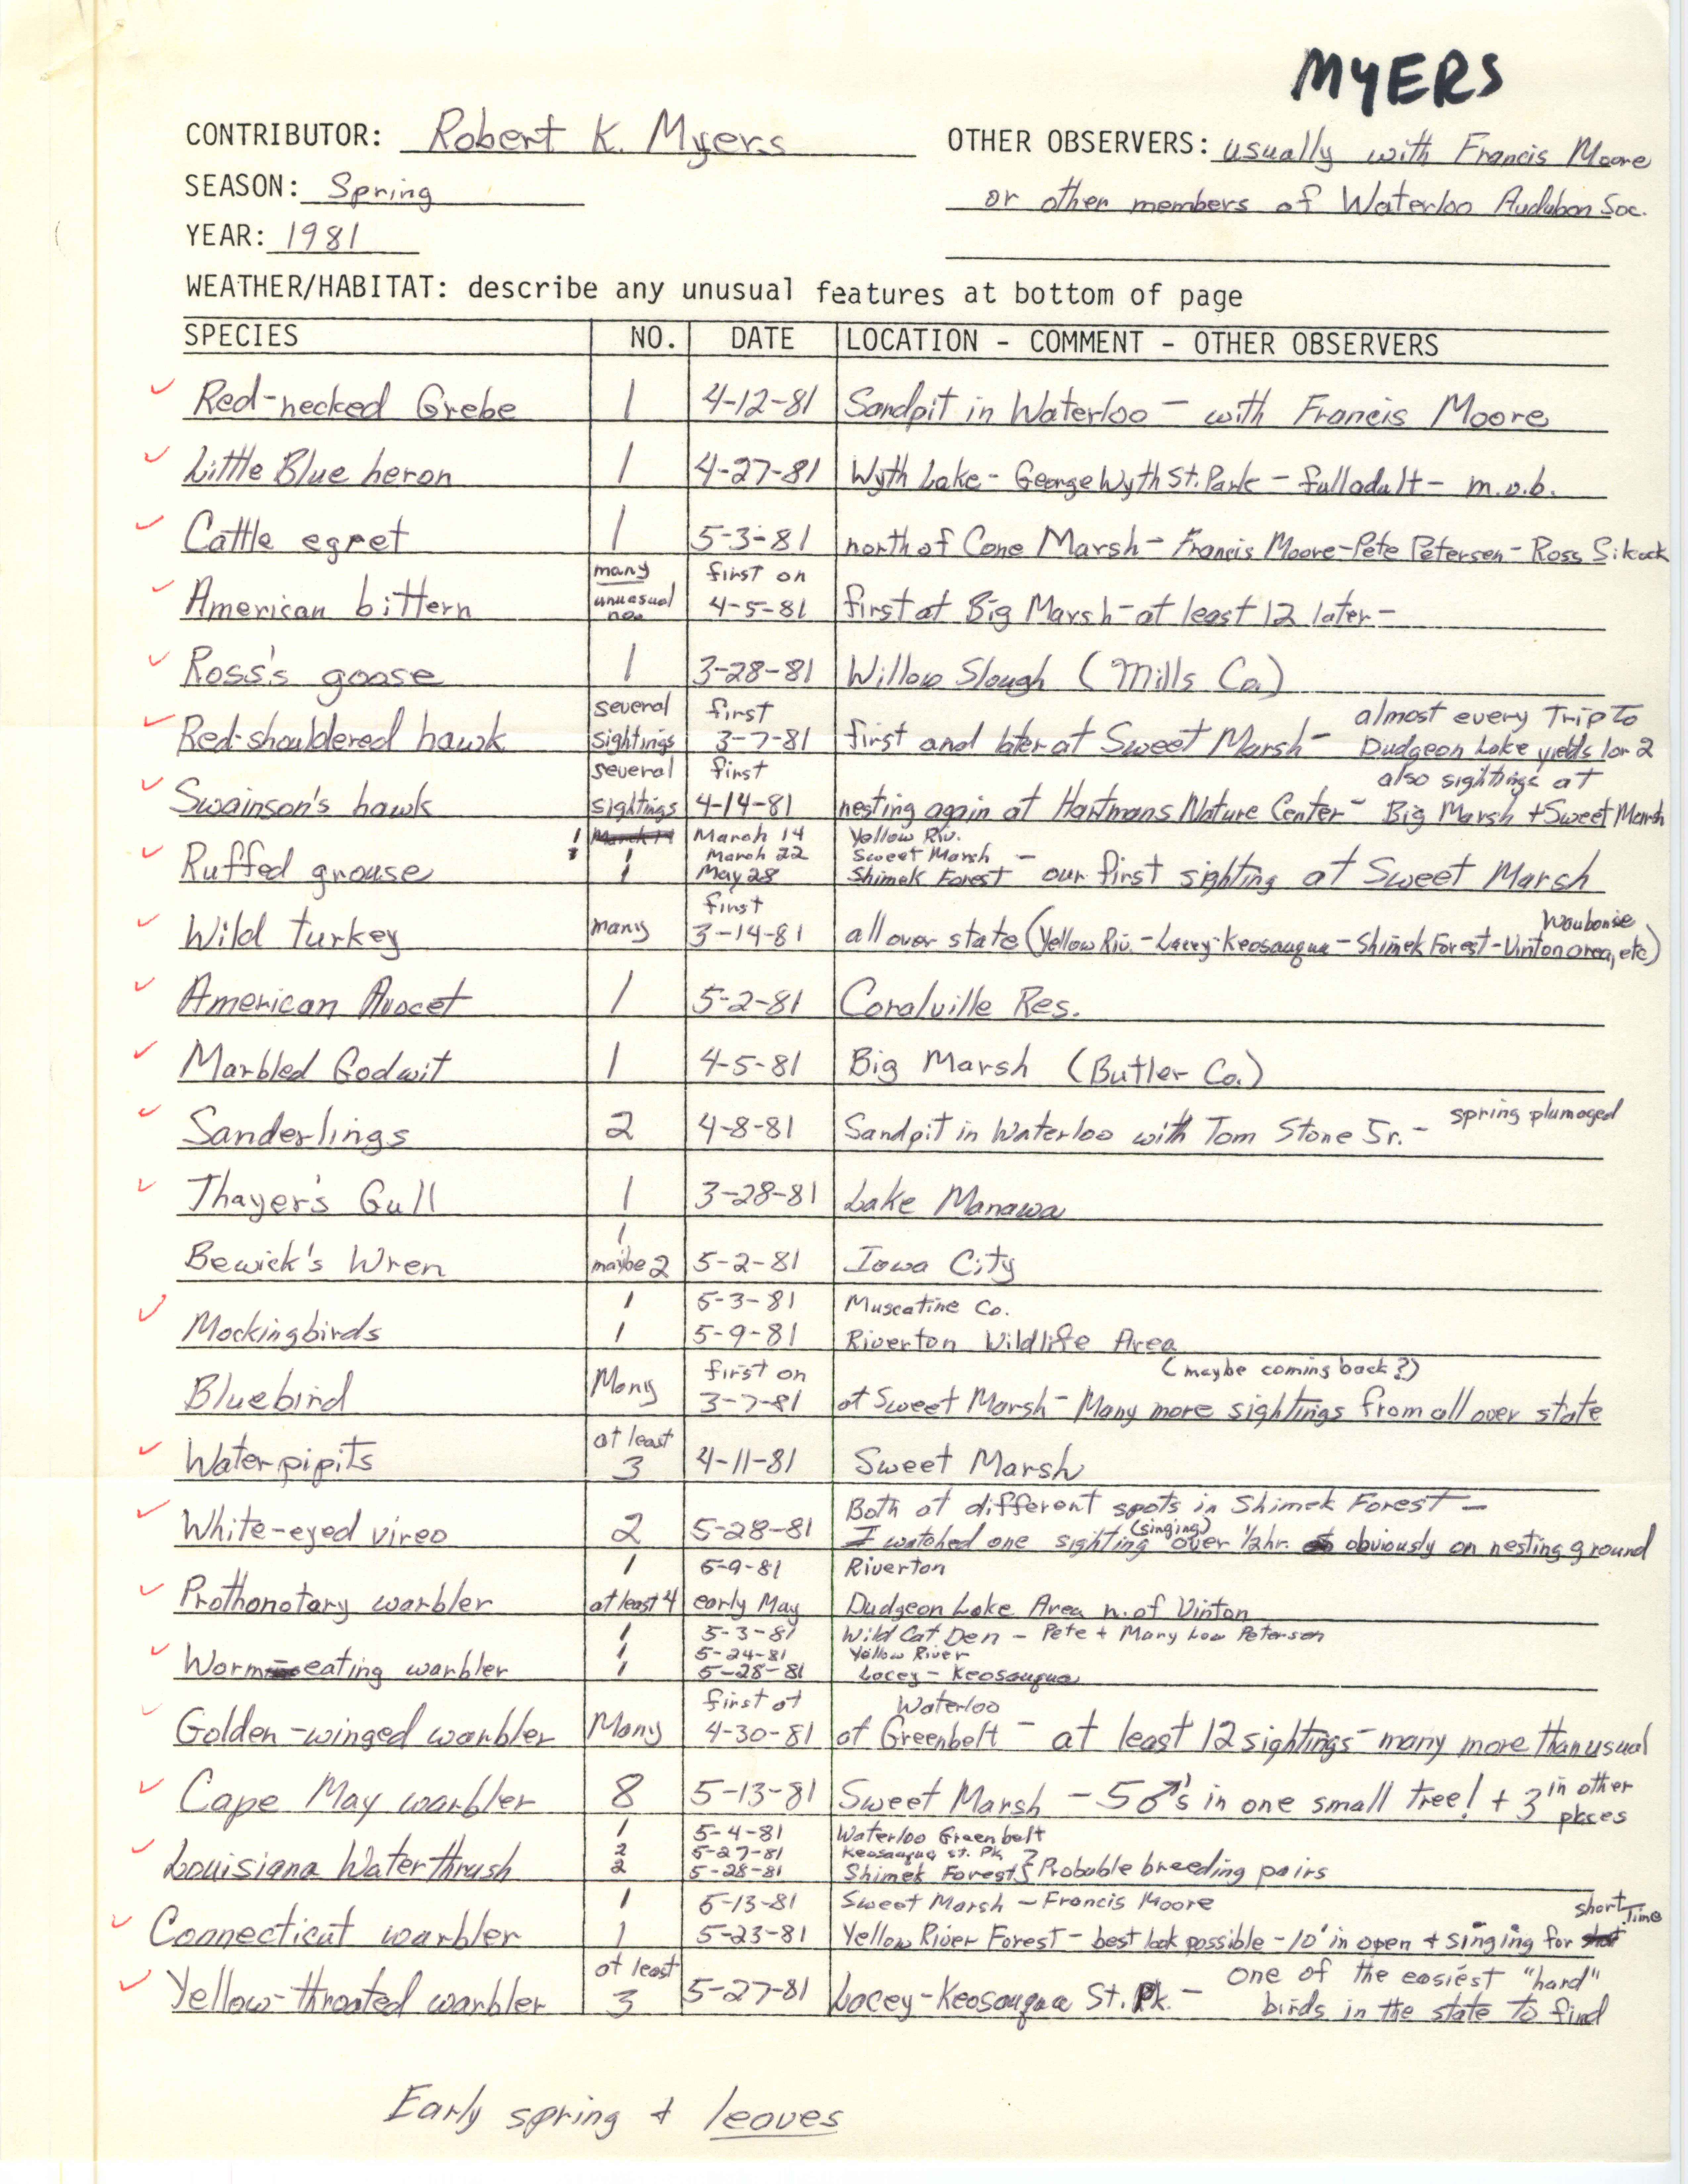 Annotated bird sighting list for spring 1981 compiled by Robert Myers